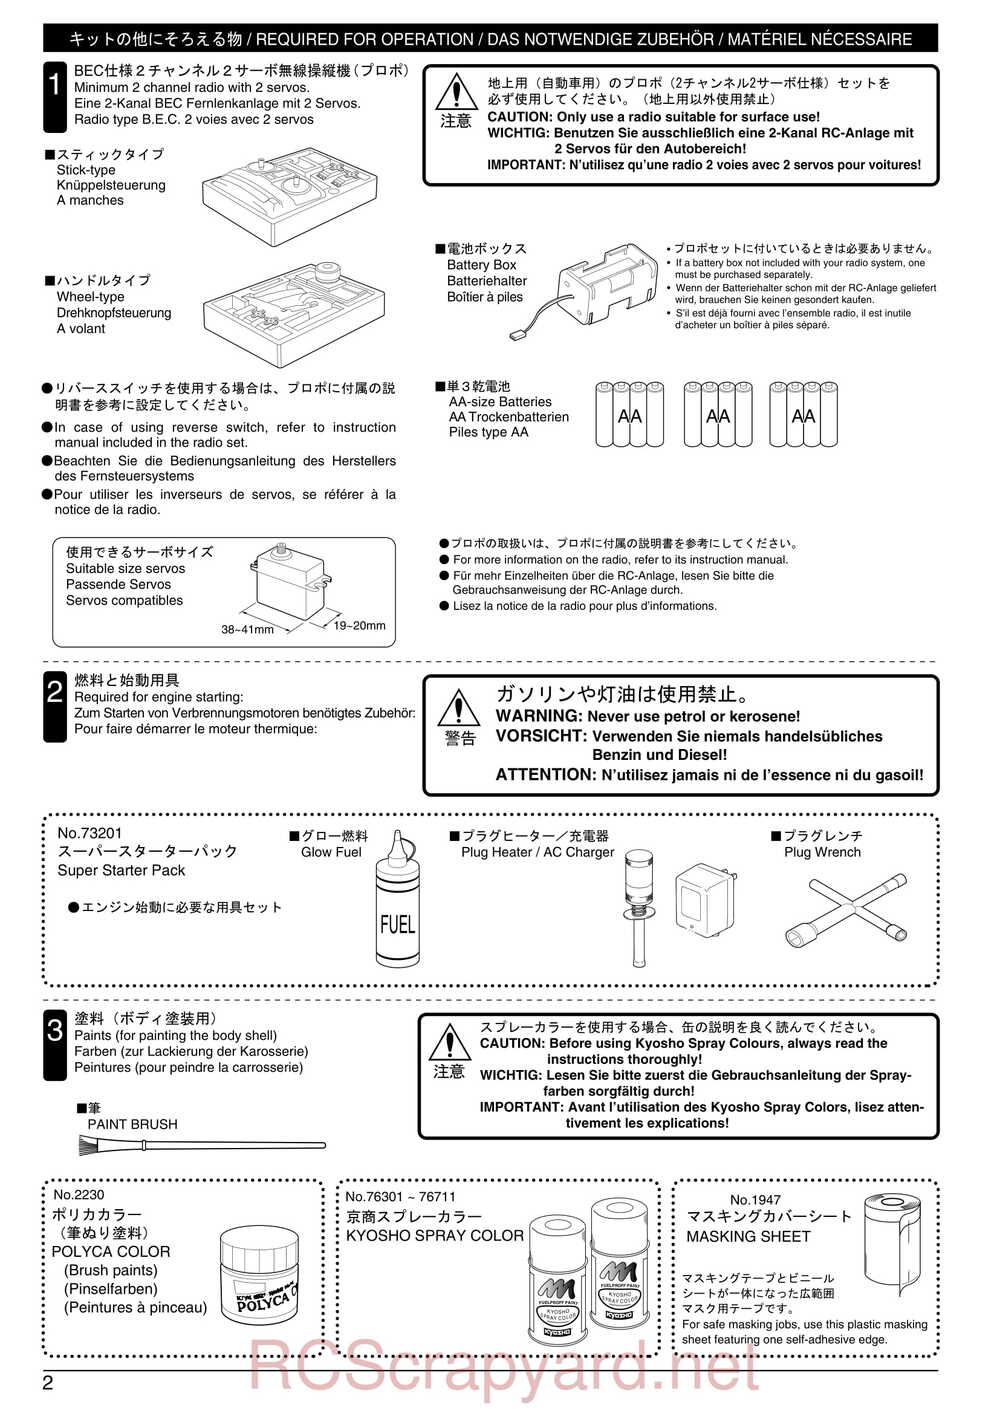 Kyosho - 31122 - V-One S2 - Manual - Page 02